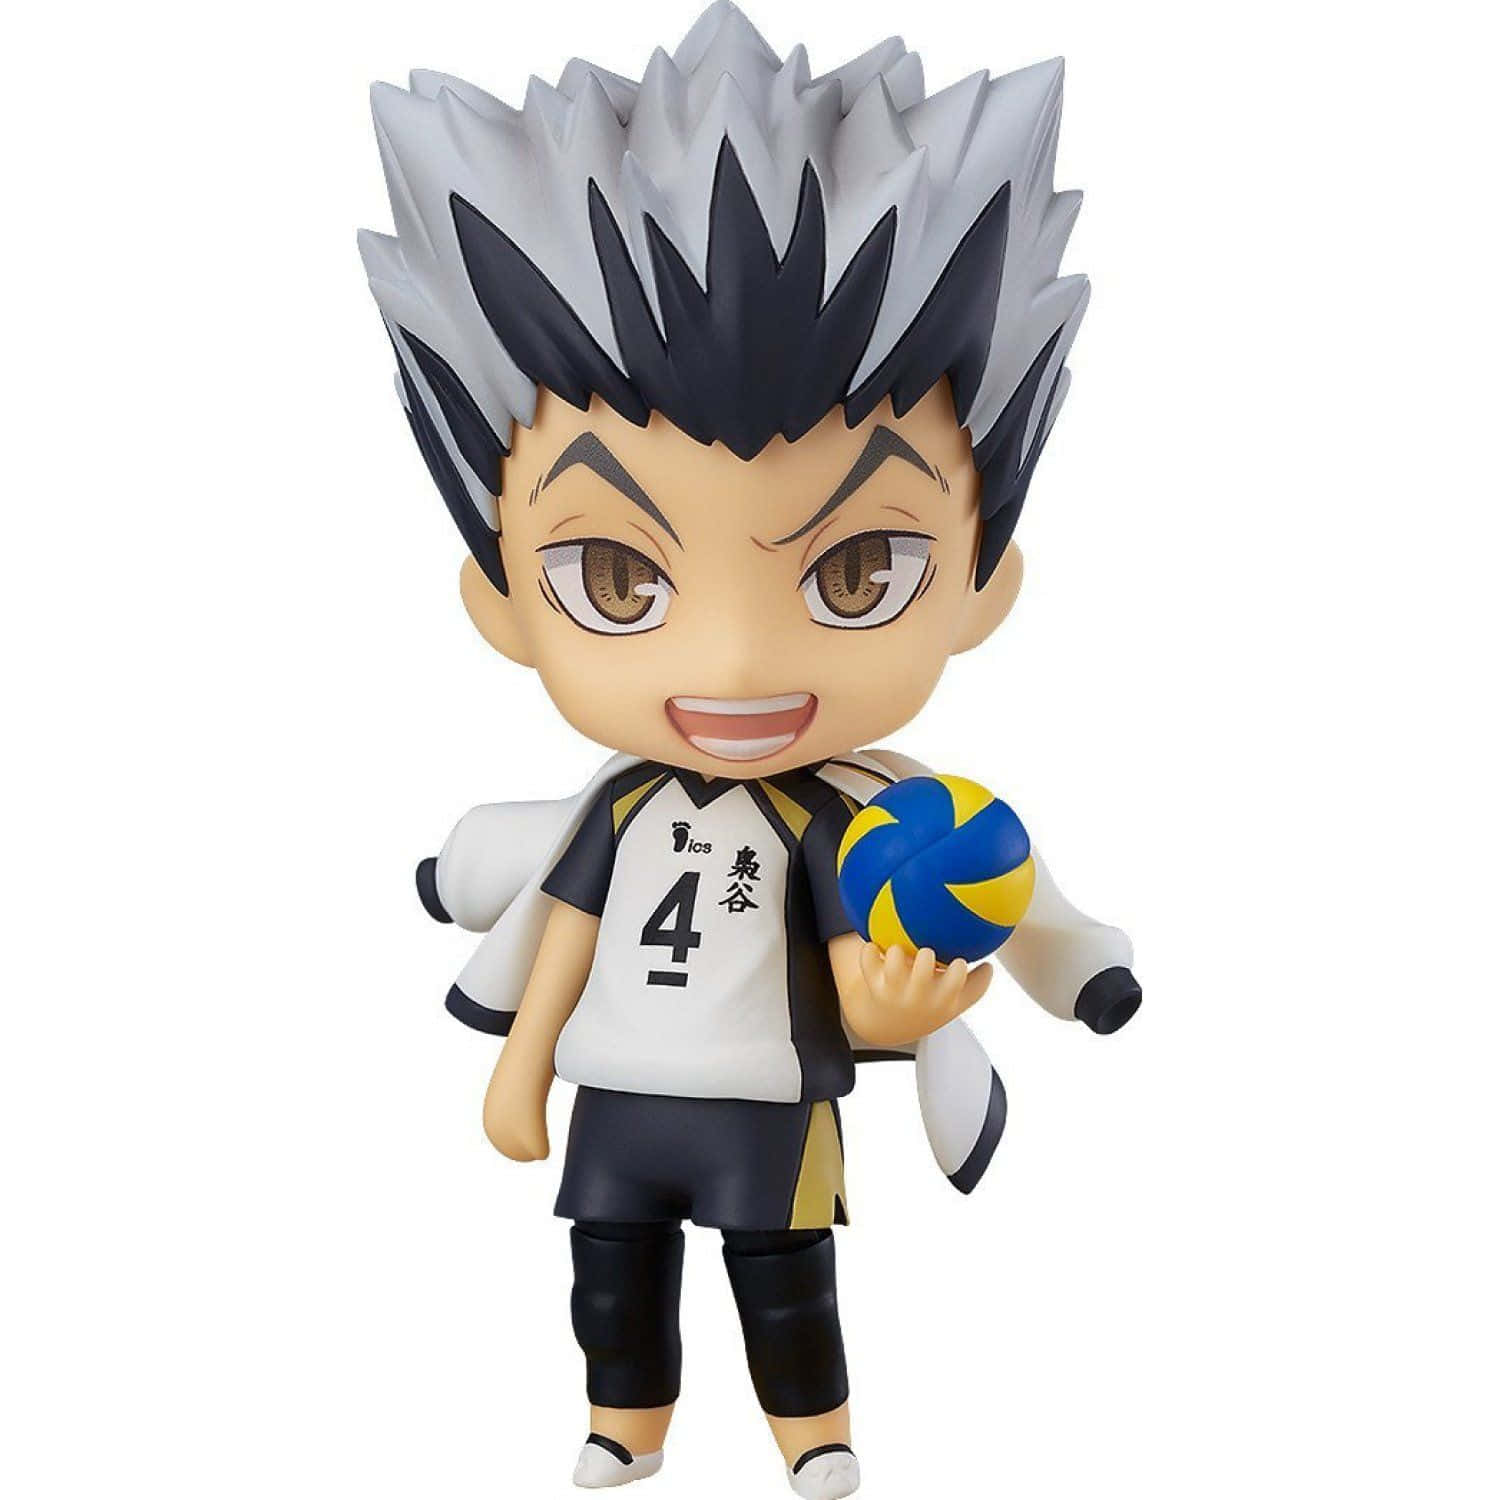 Ktarbokuto Nendoroid Action Figure Would Be Translated Into German As 